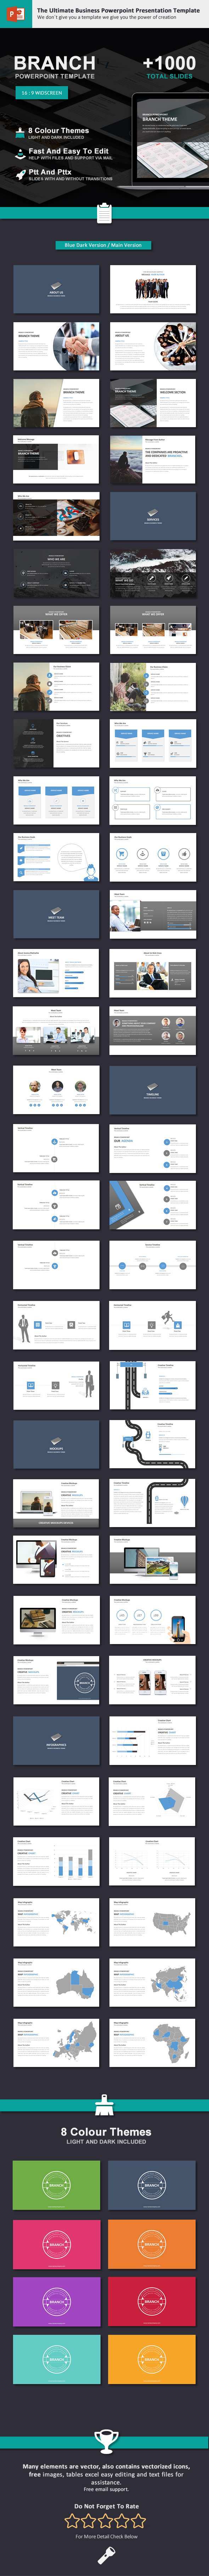 Branch Business Theme Powerpoint Powerpoint Templates Business Powerpoint Templates Powerpoint